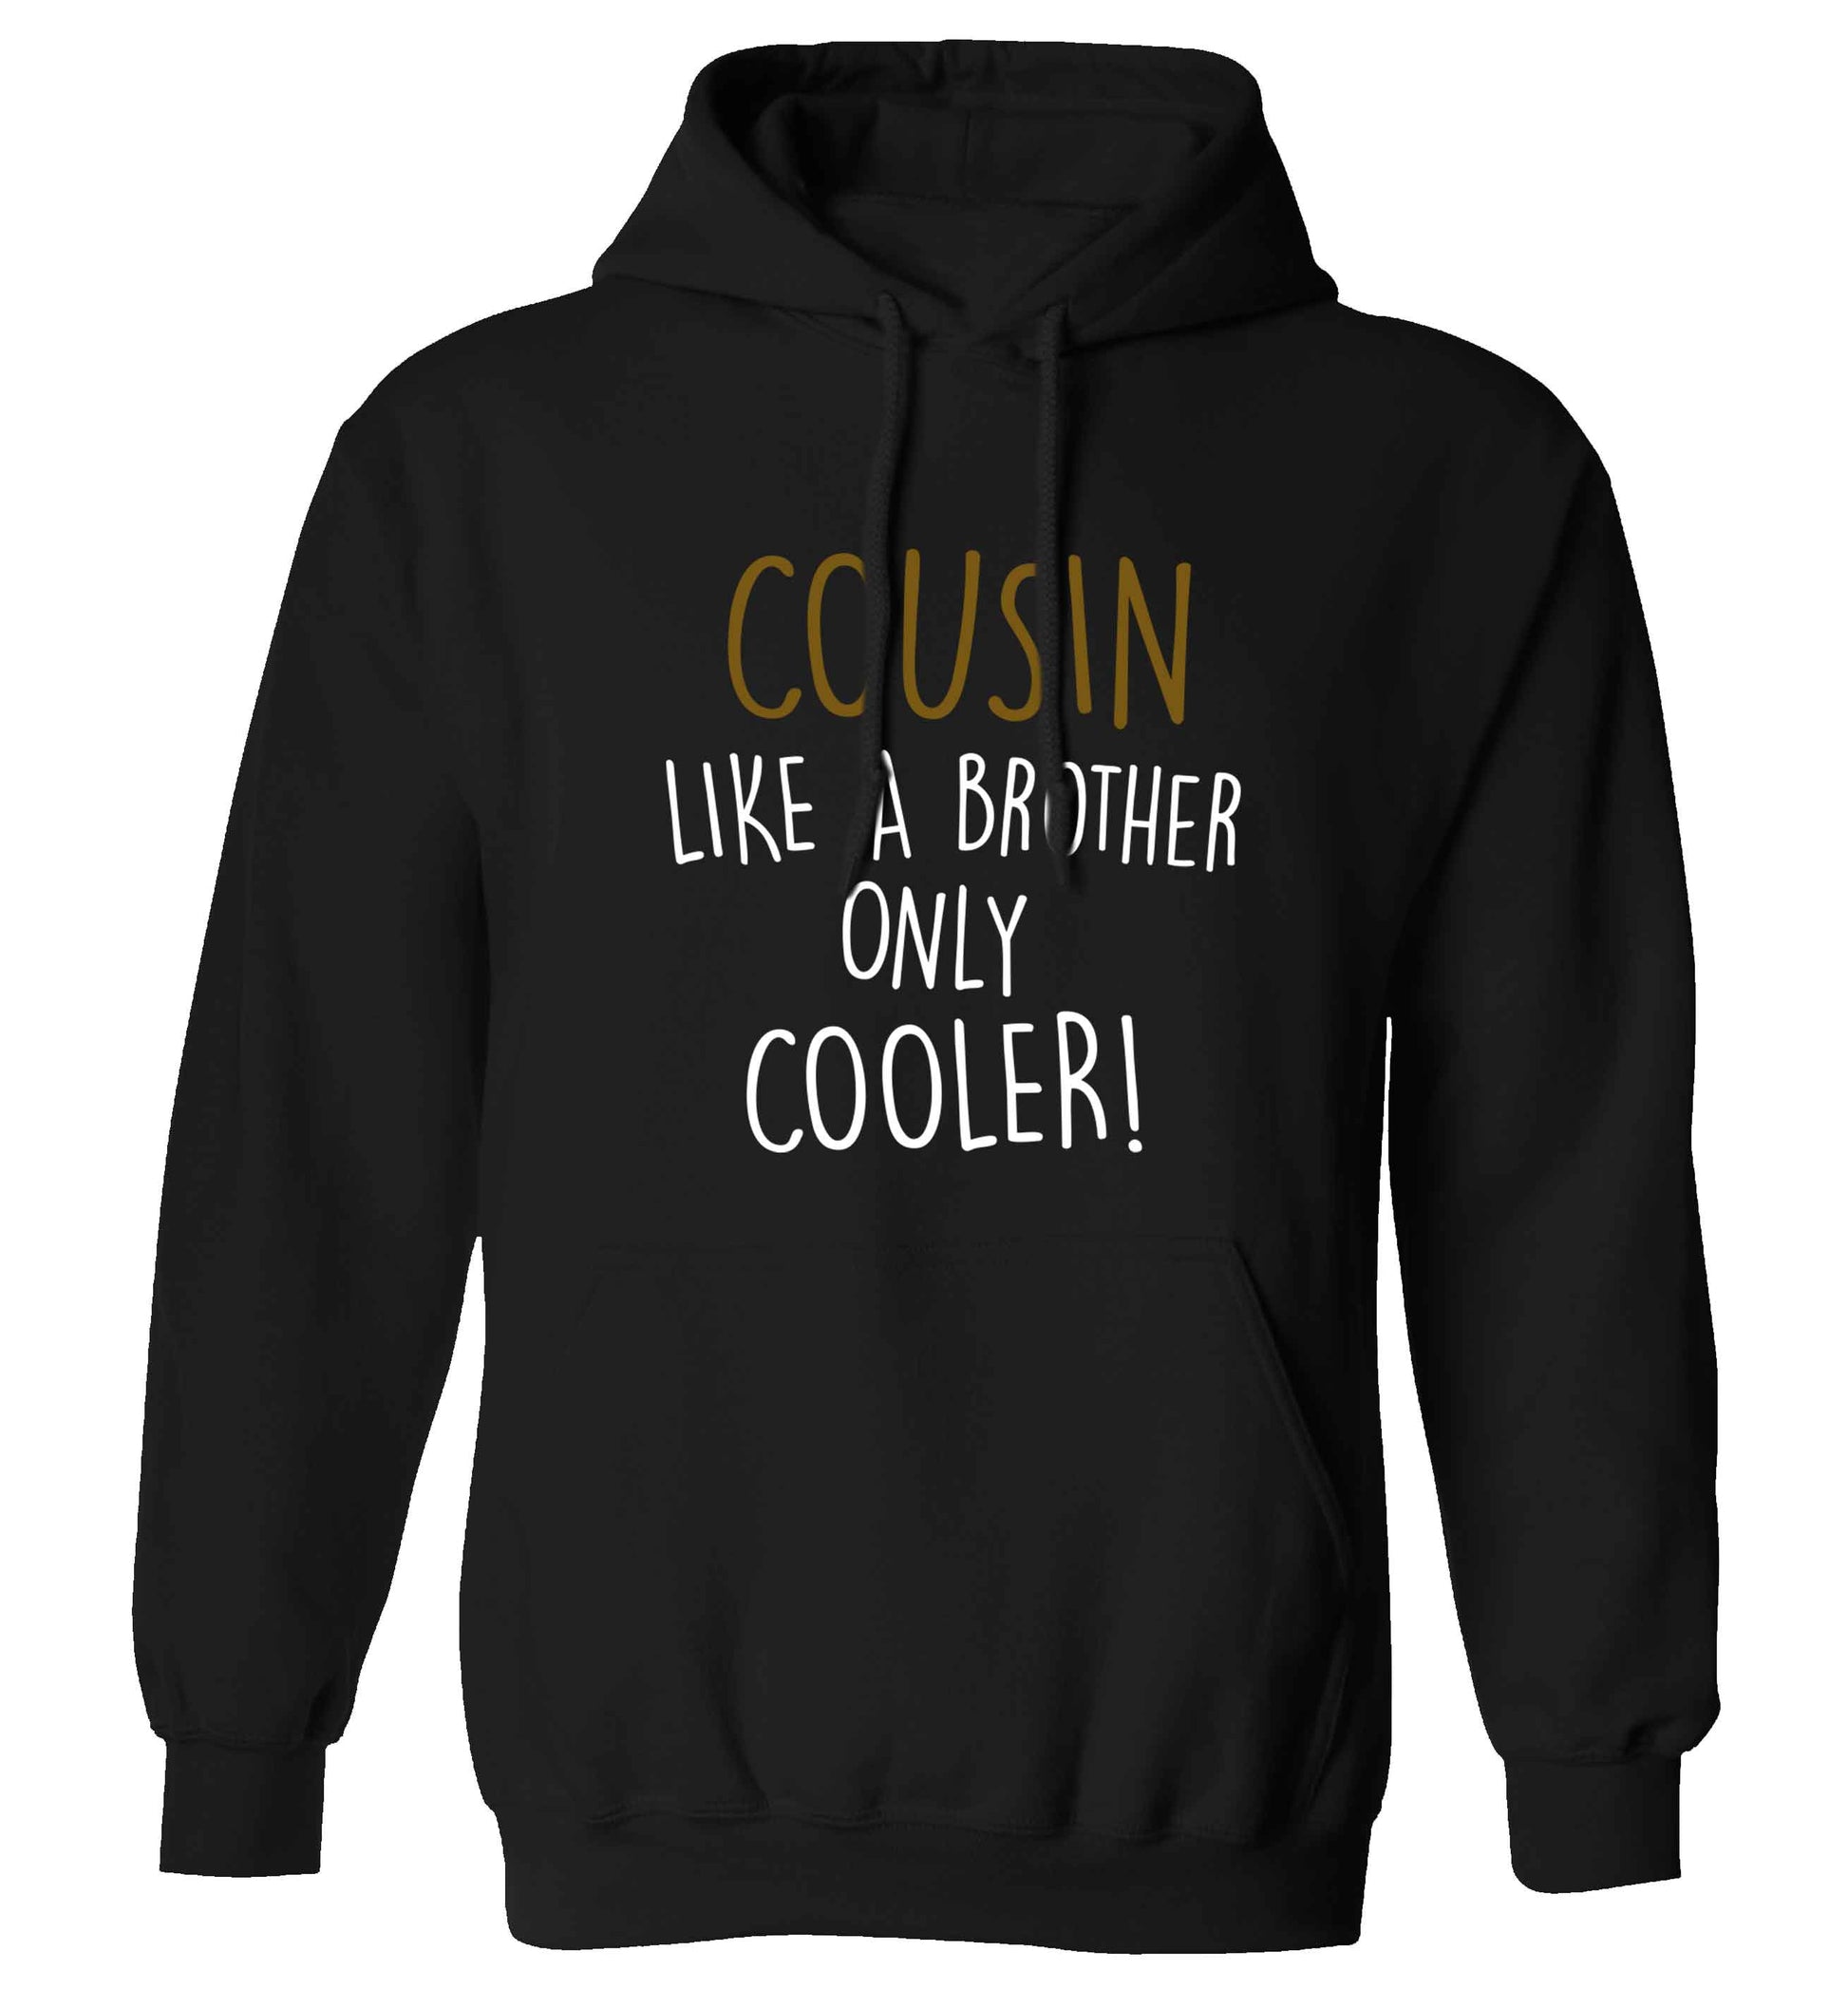 Cousin like a brother only cooler adults unisex black hoodie 2XL